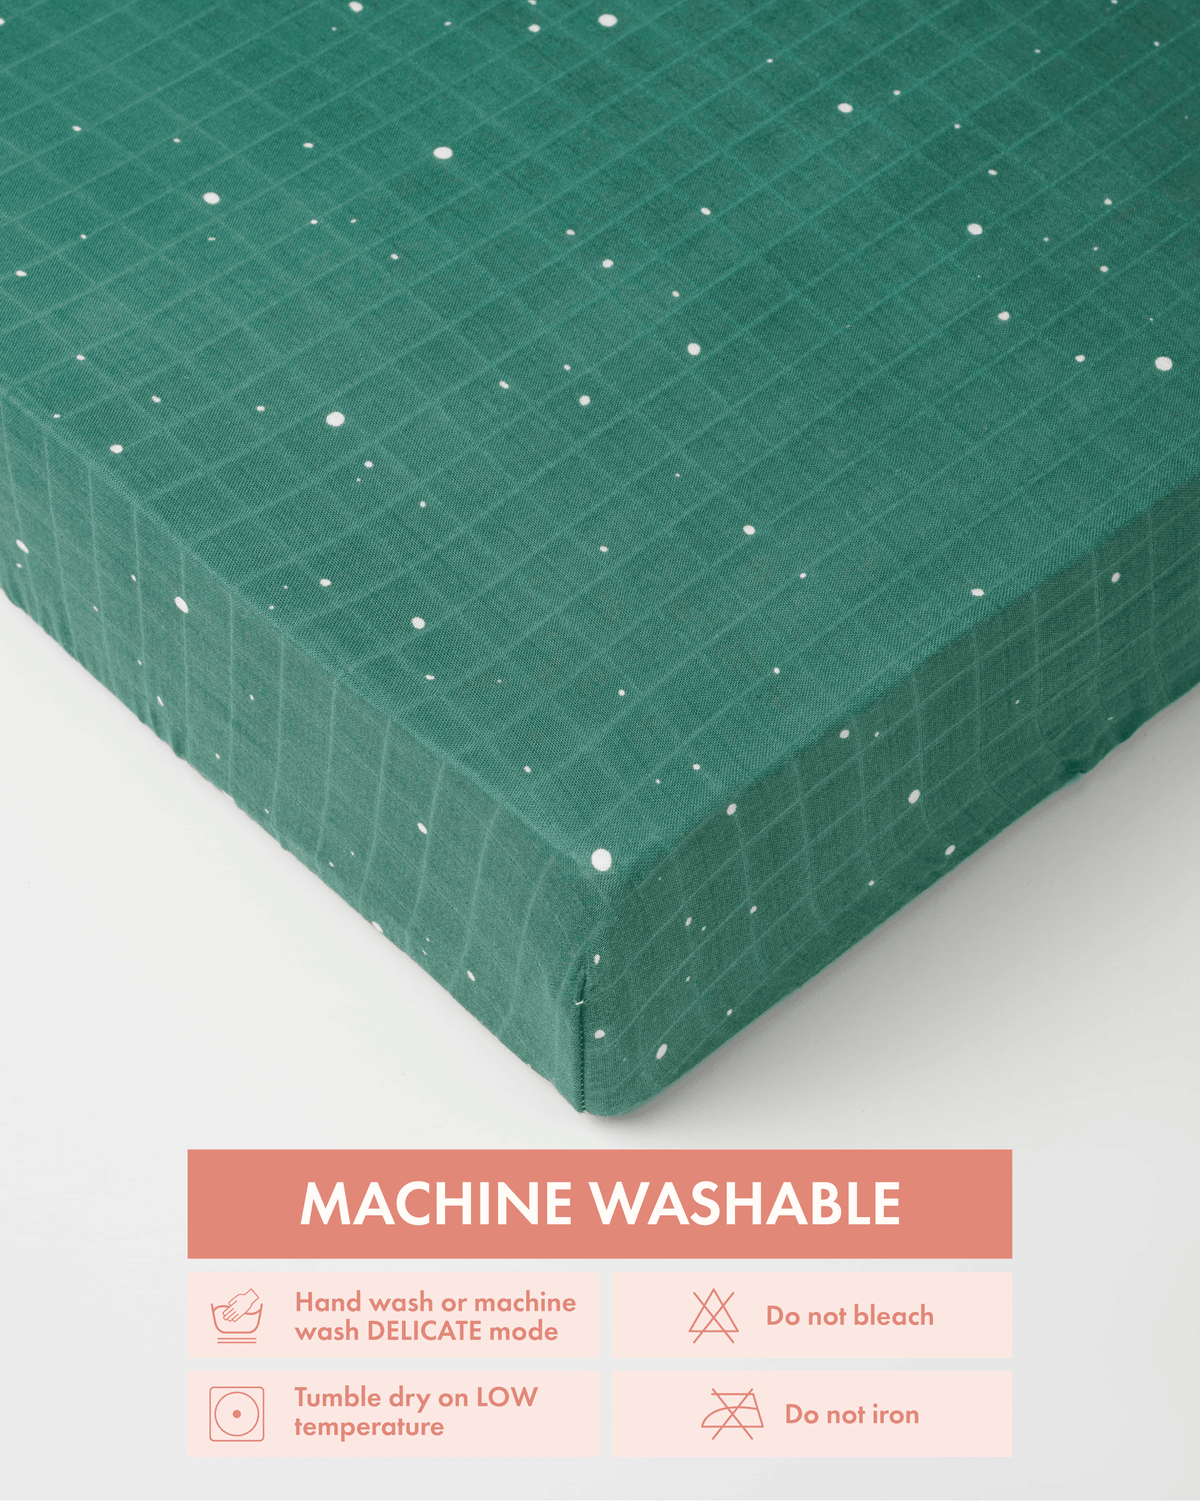 Fitted Crib Sheet - Starry Green - Canada Stock